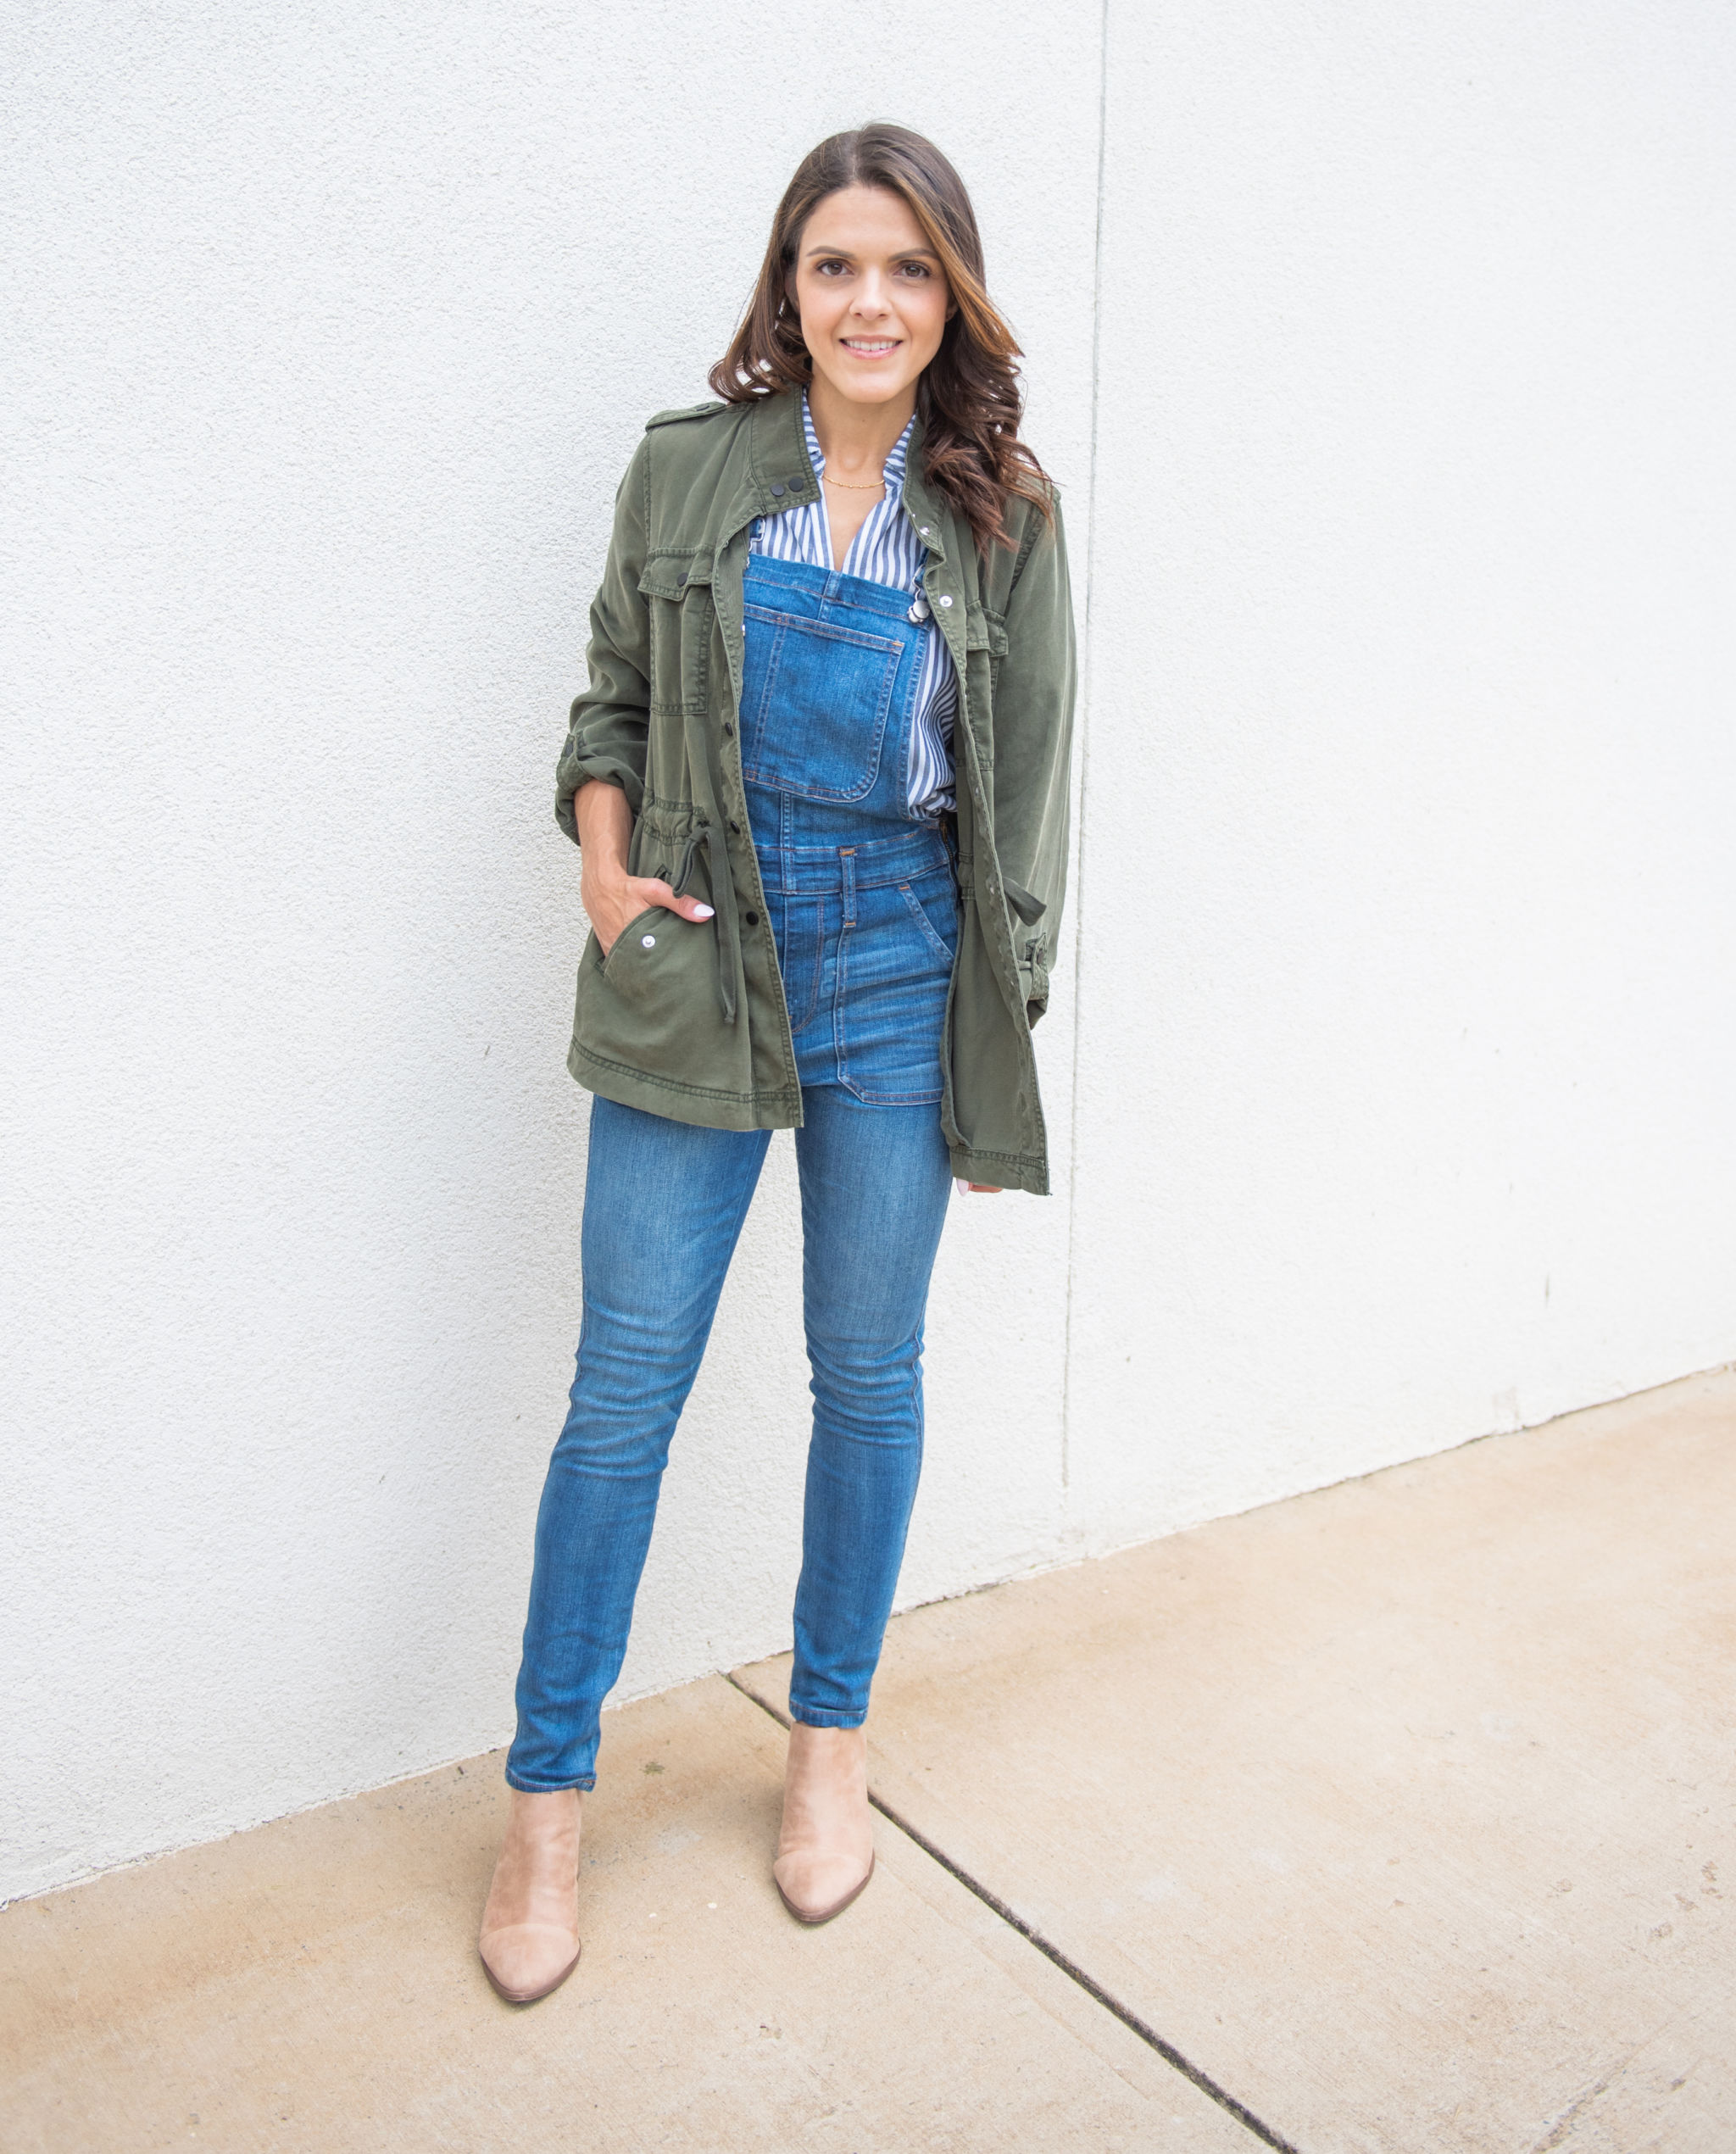 4 ways to transition skinny overalls to Fall